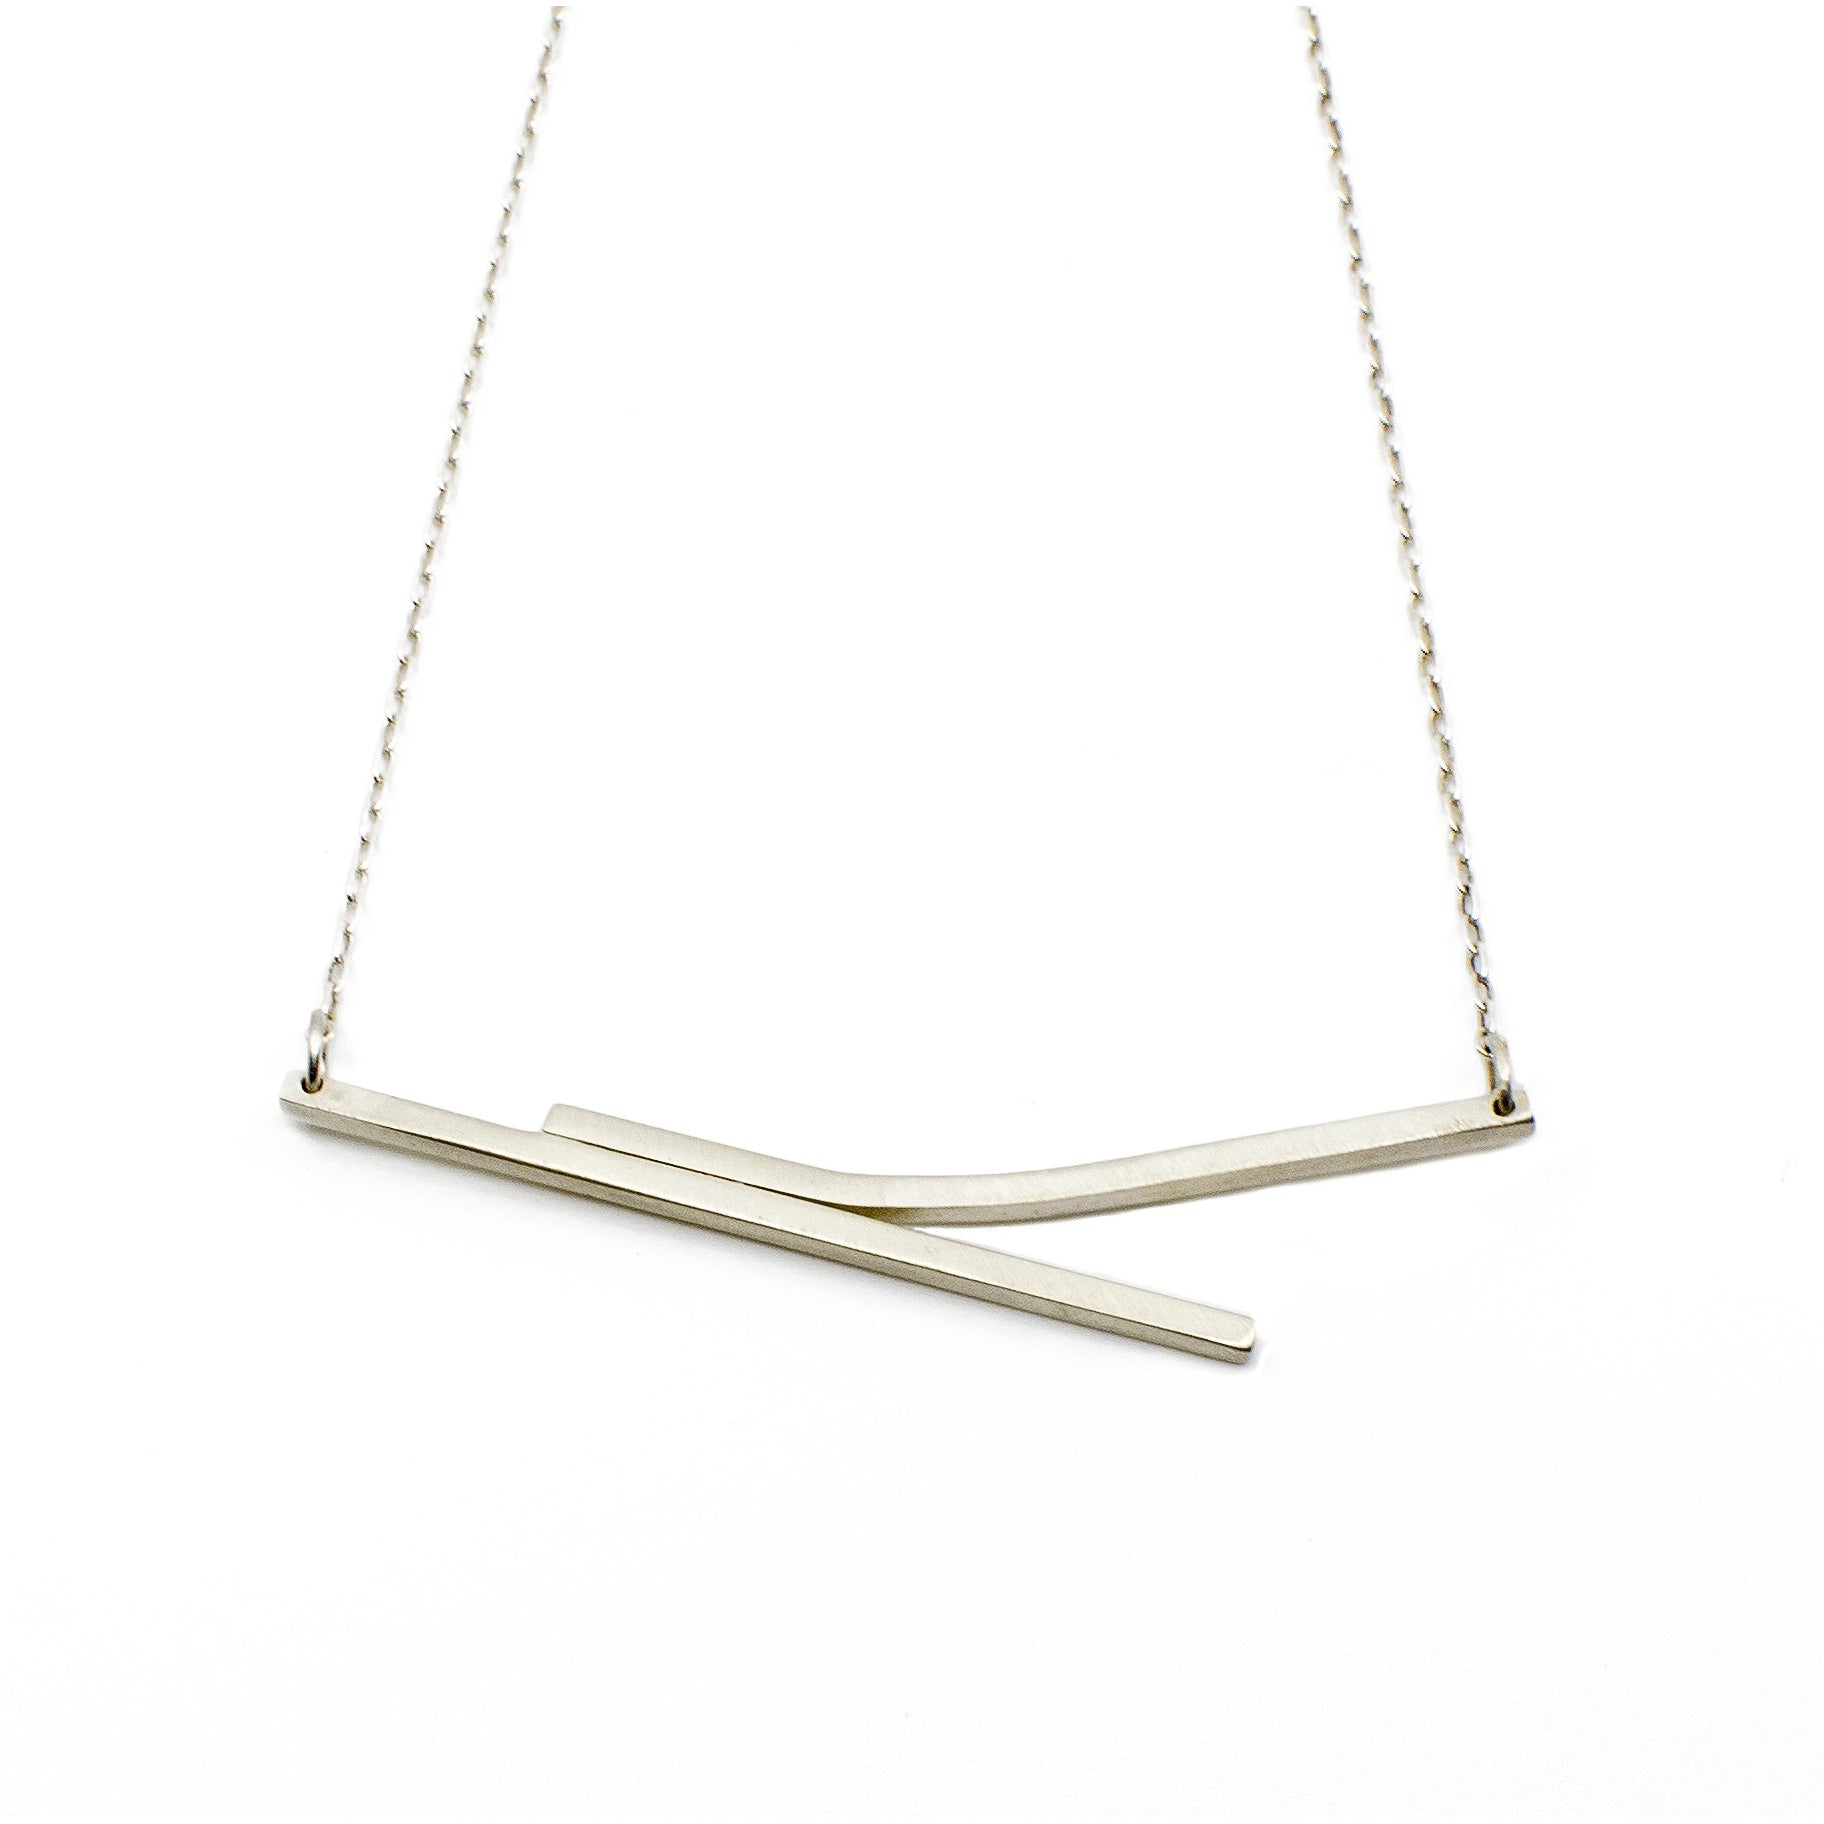 Lines 2 Necklace - Sterling Silver